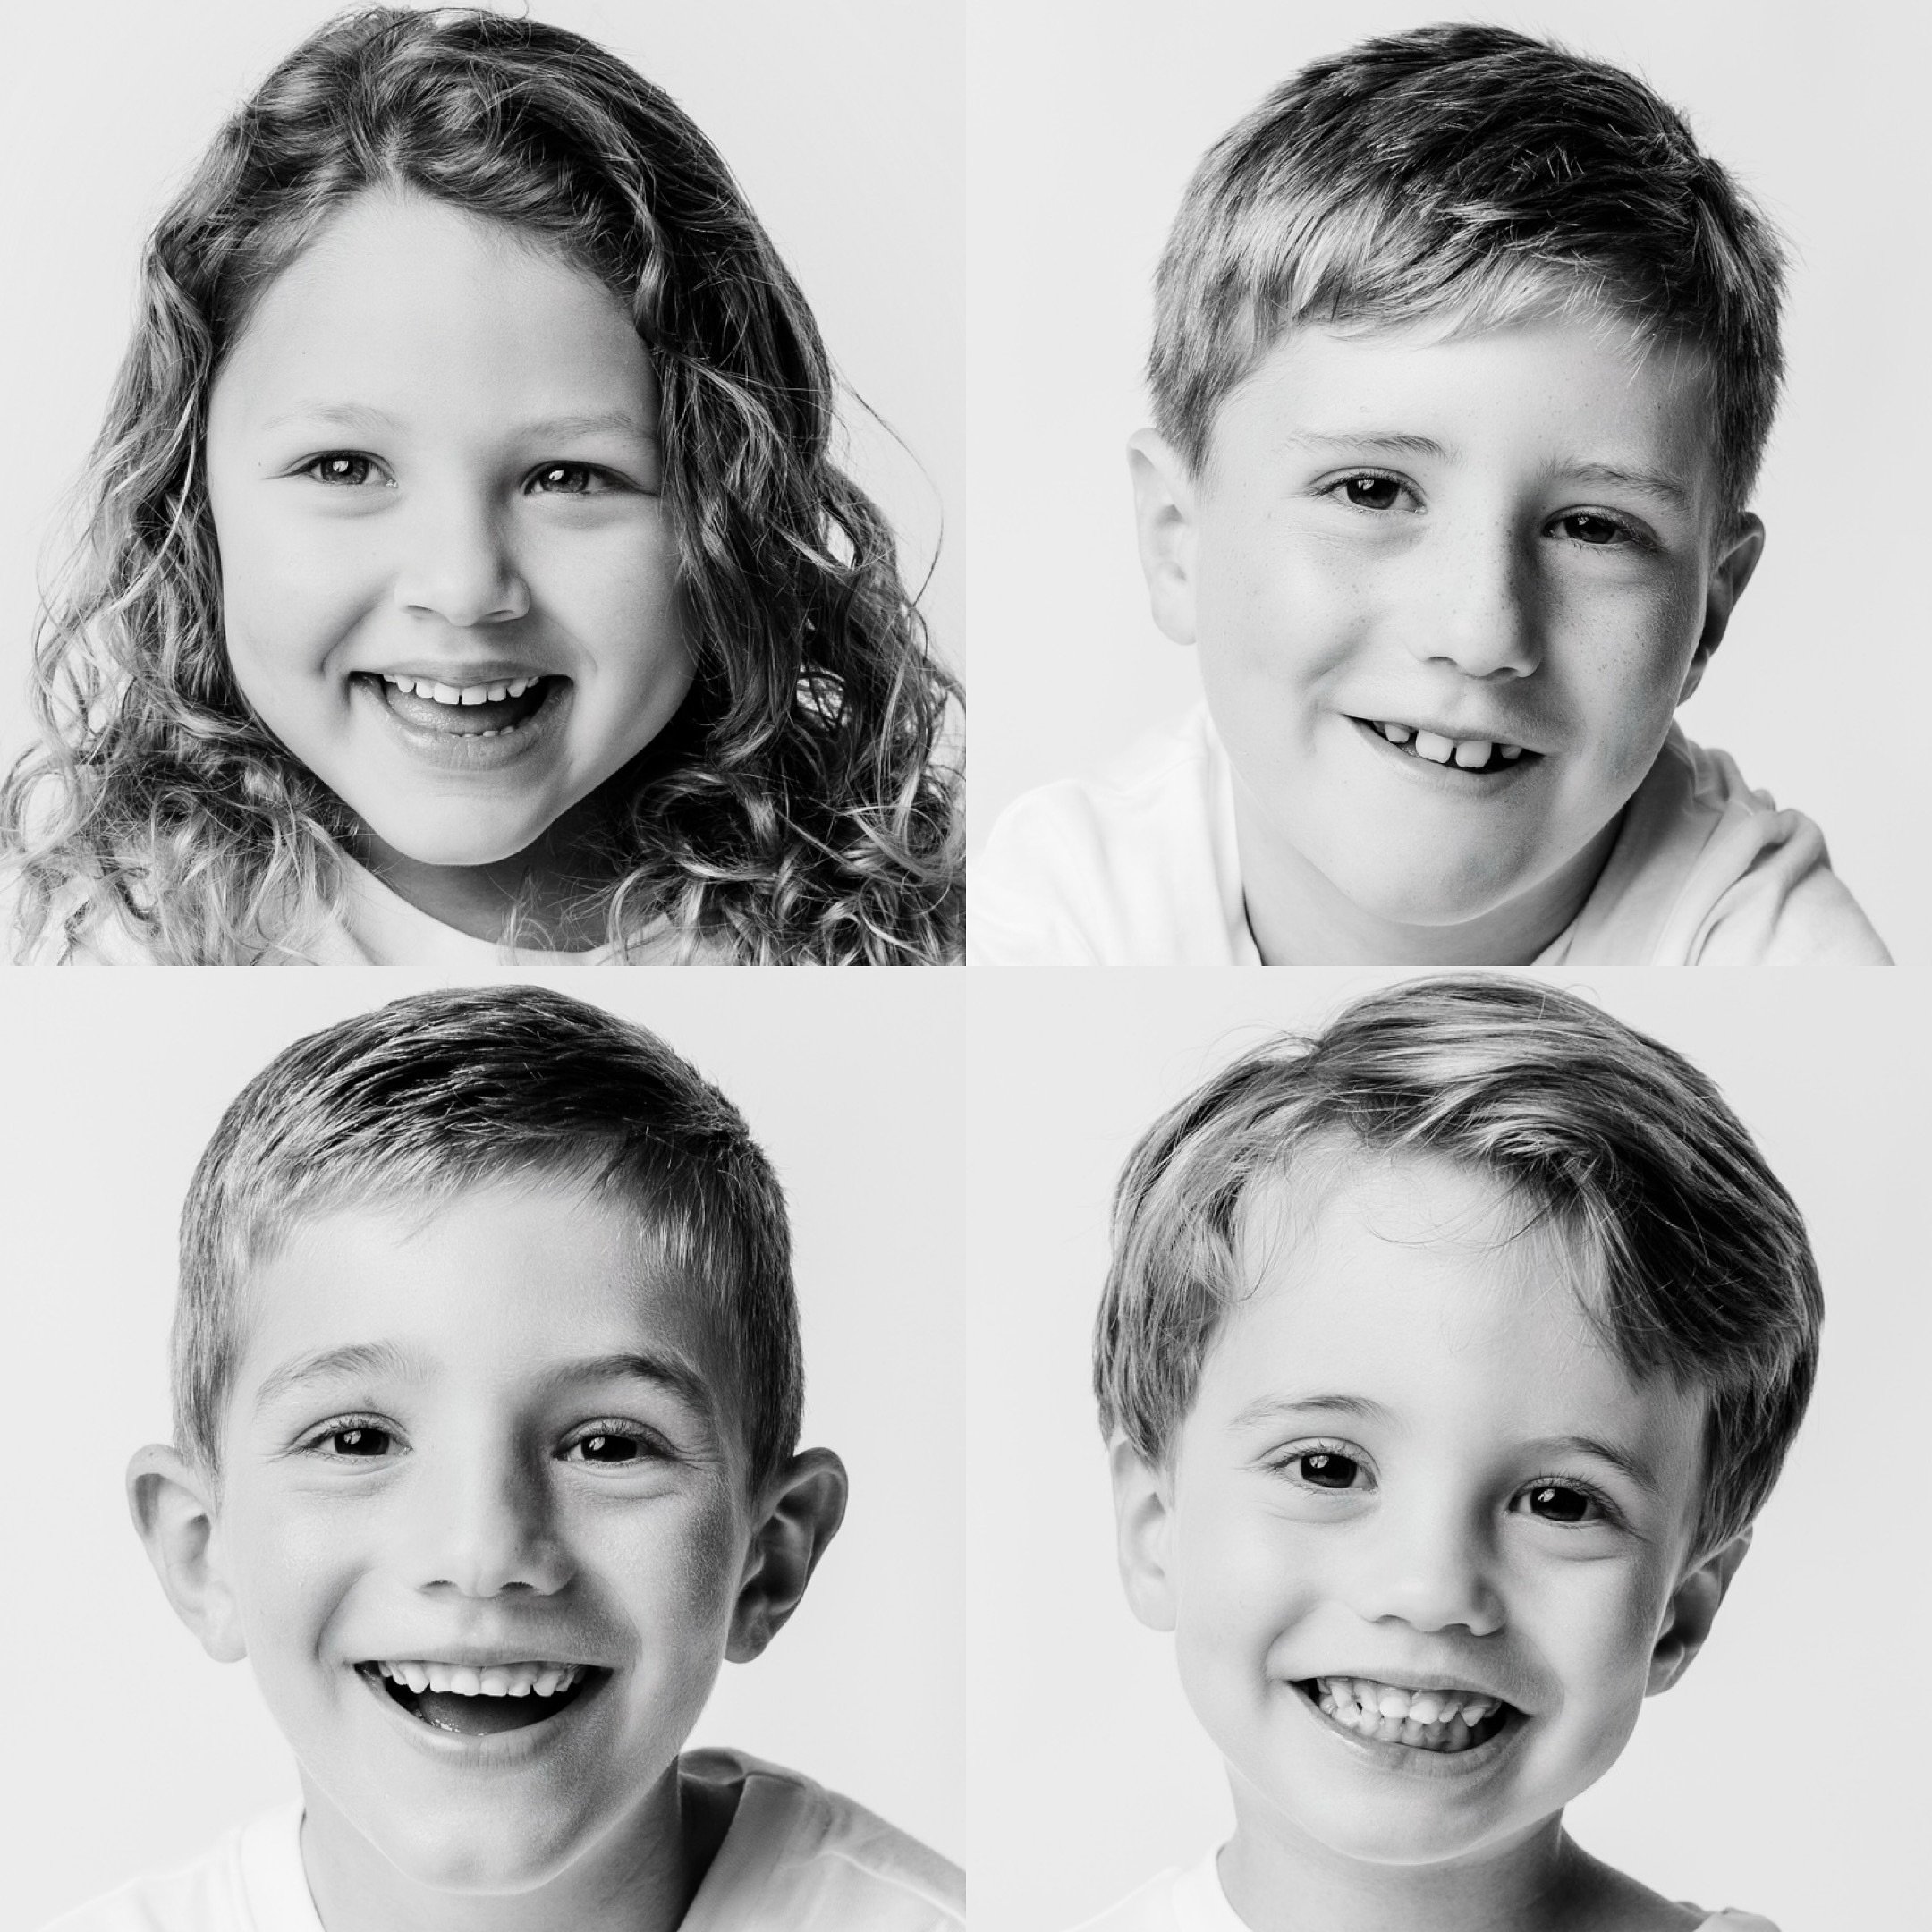 📷 In a matter of minutes you can capture a totally timeless and unique photo of your child. How lucky would they feel seeing their smiling face on your walls? 🙌🏻

Are you looking to capture timeless and elegant moments that will become treasured f